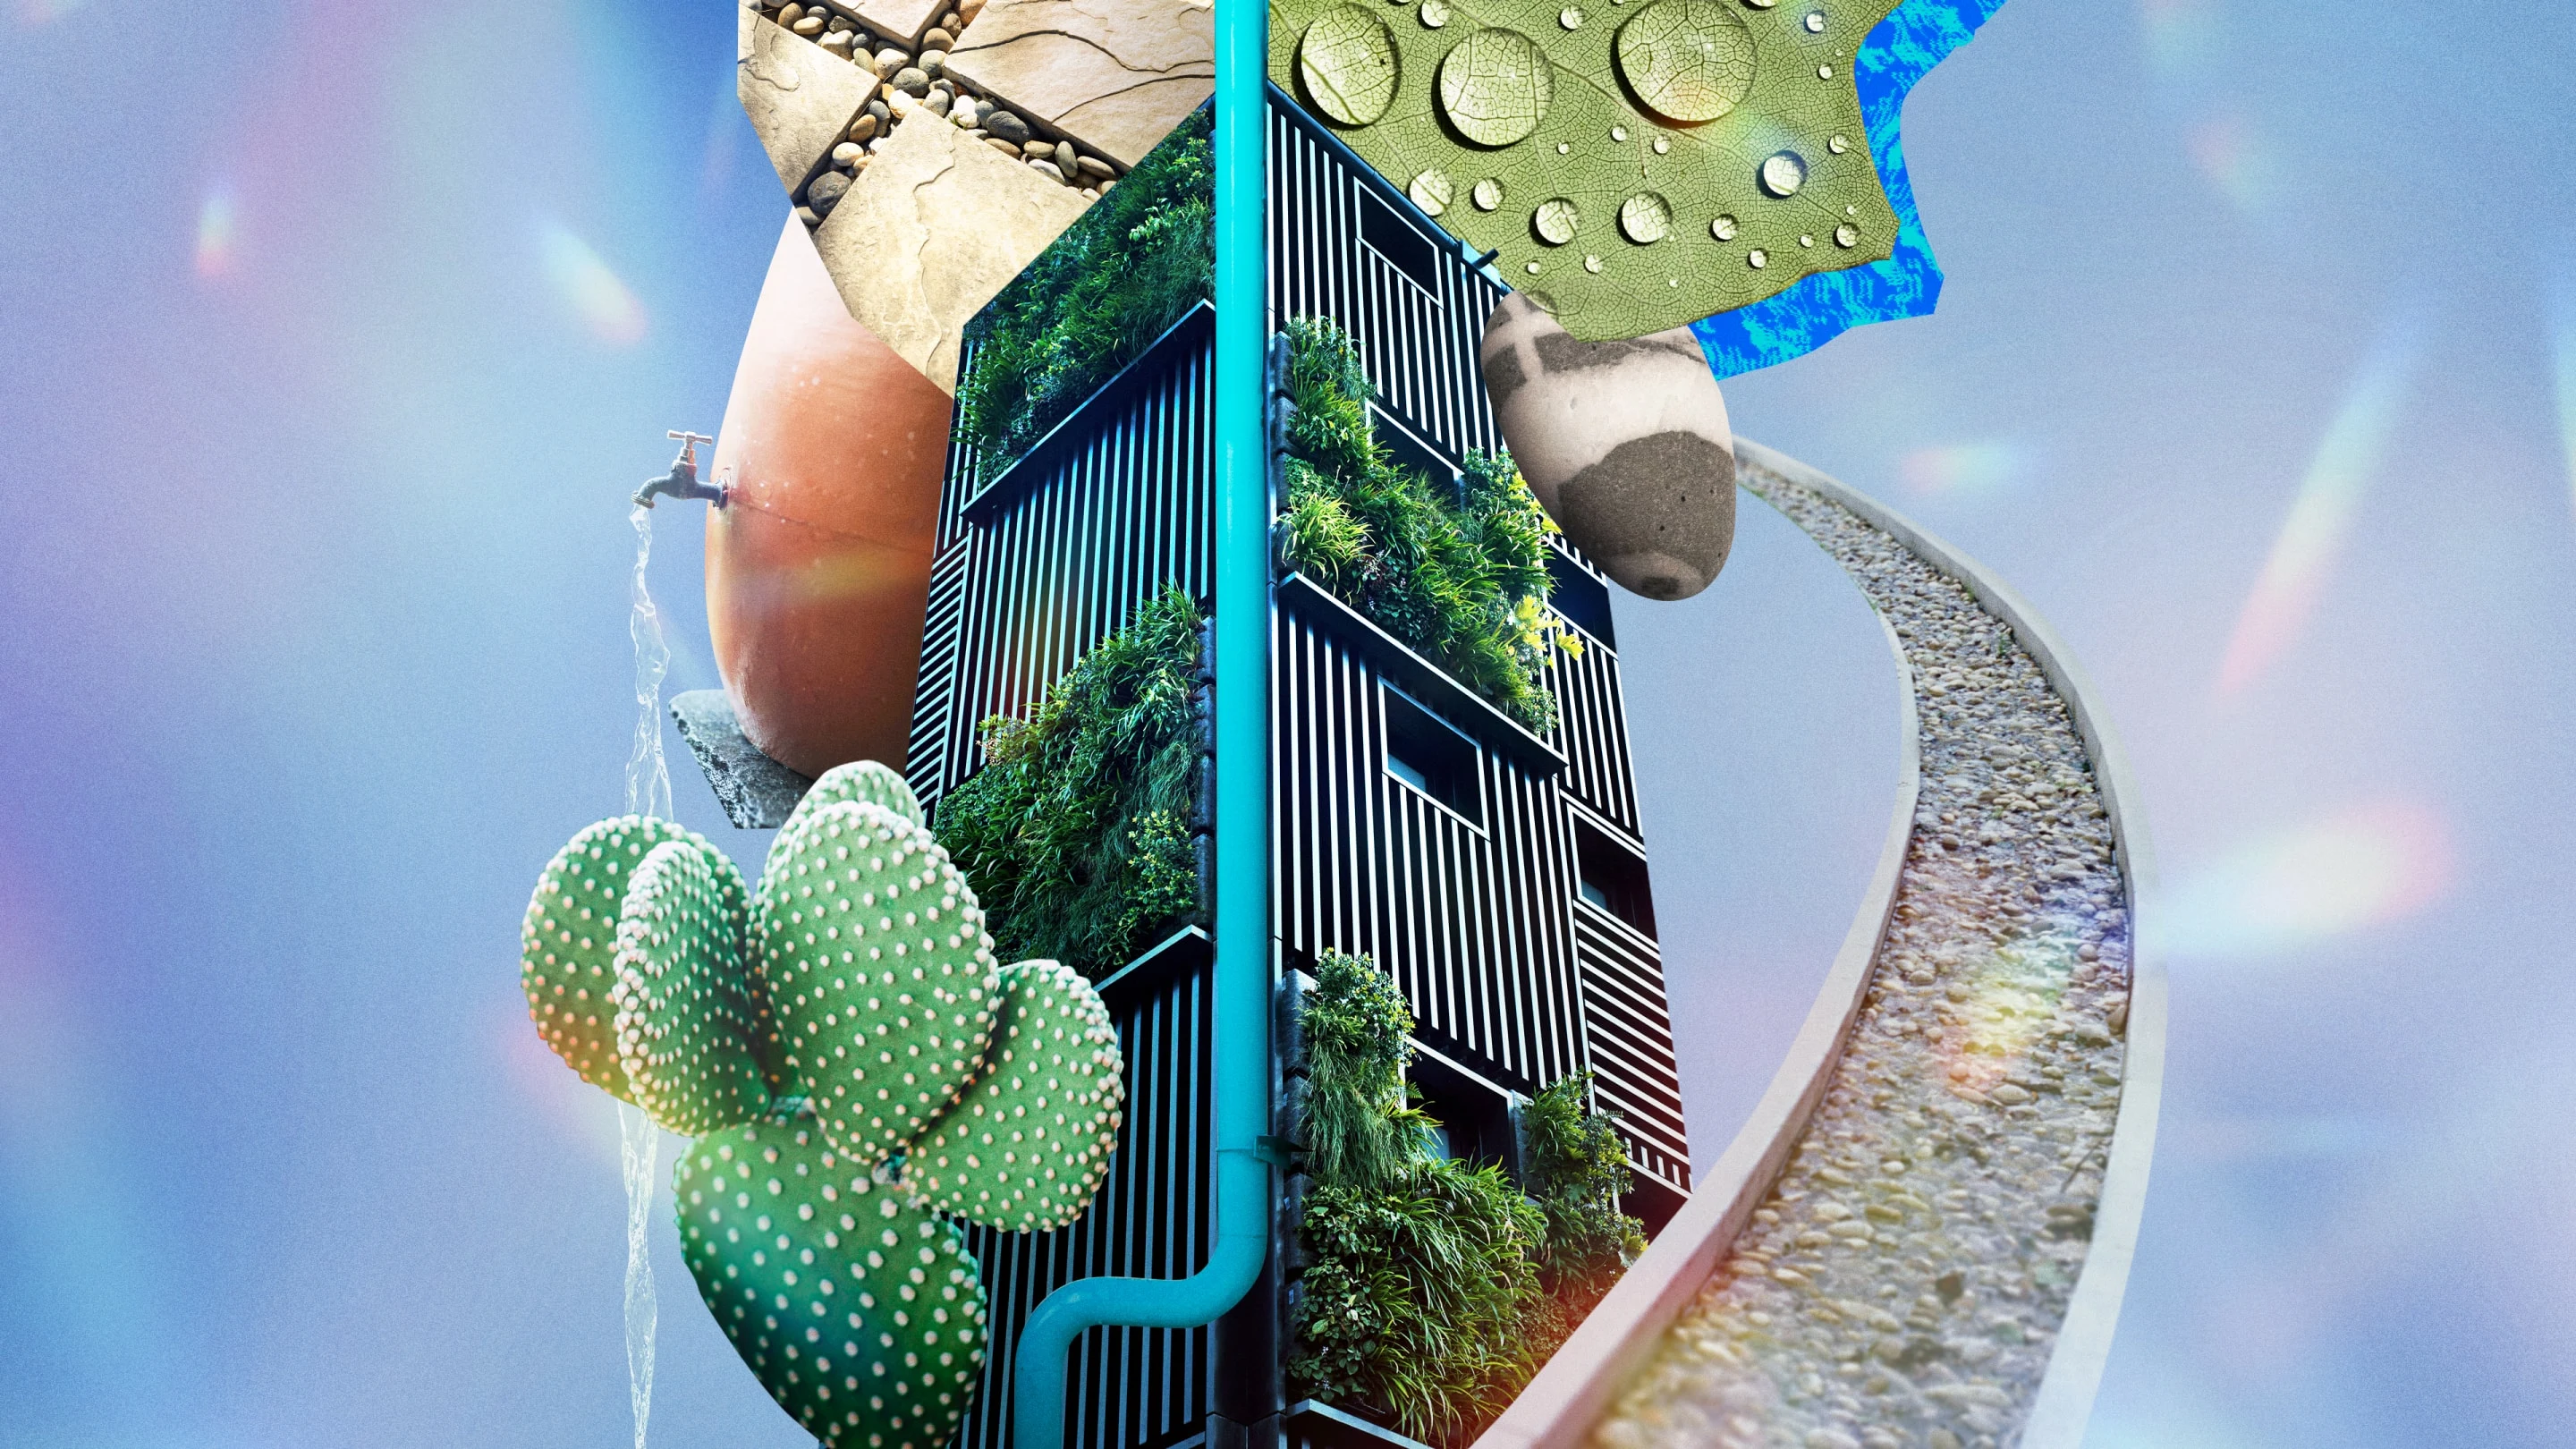 A free-flowing collage featuring water droplets gathering on a leaf, a pebbled pathway, a cactus plant, a flowing water spout and a vertical garden.